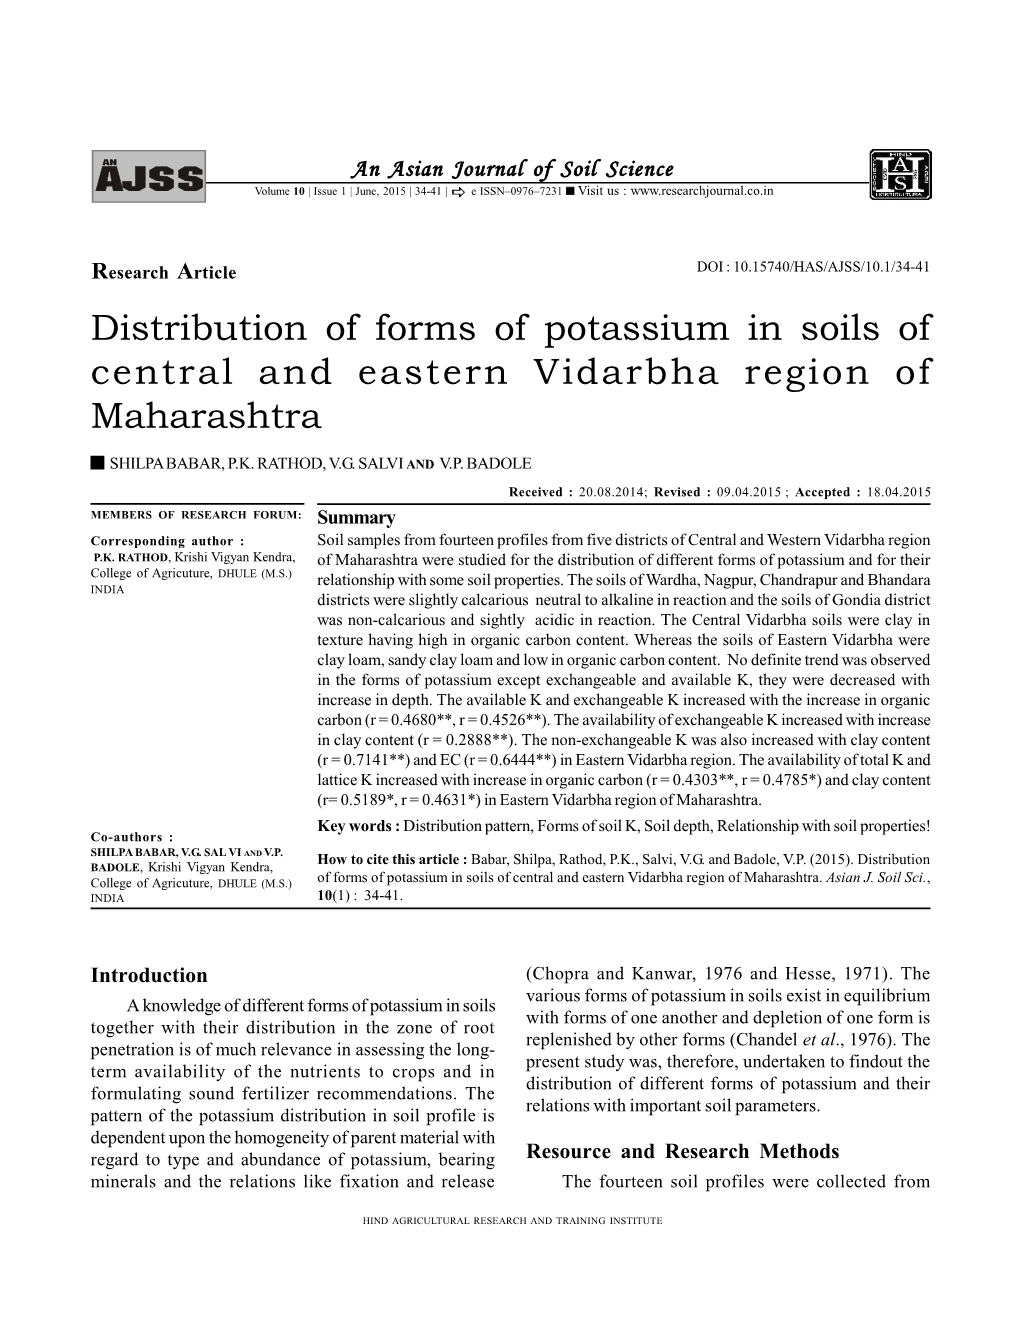 Distribution of Forms of Potassium in Soils of Central and Eastern Vidarbha Region of Maharashtra